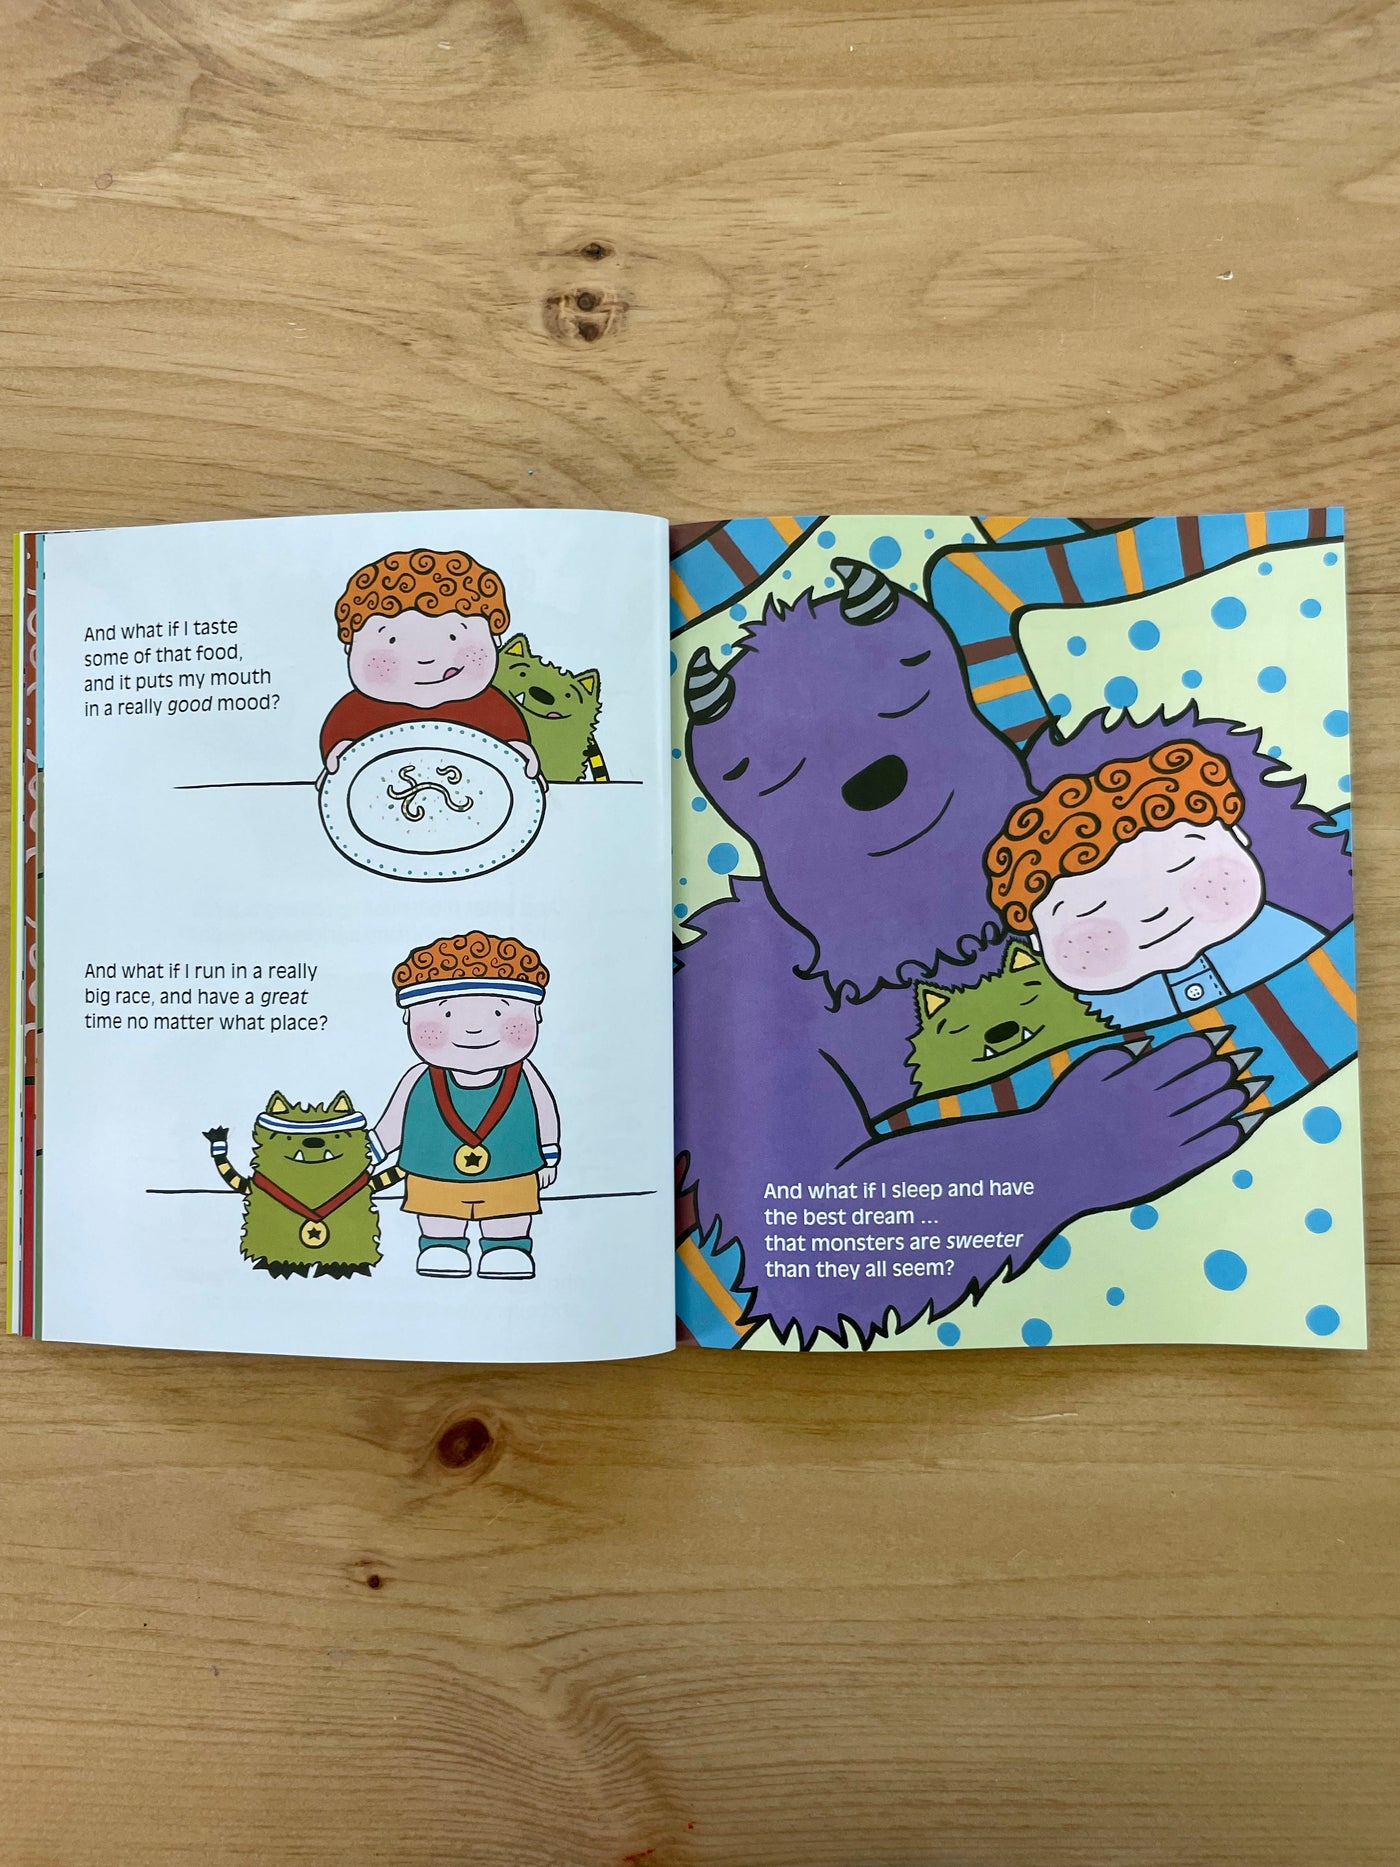 Jonathan James and the Whatif Monster Picture Book